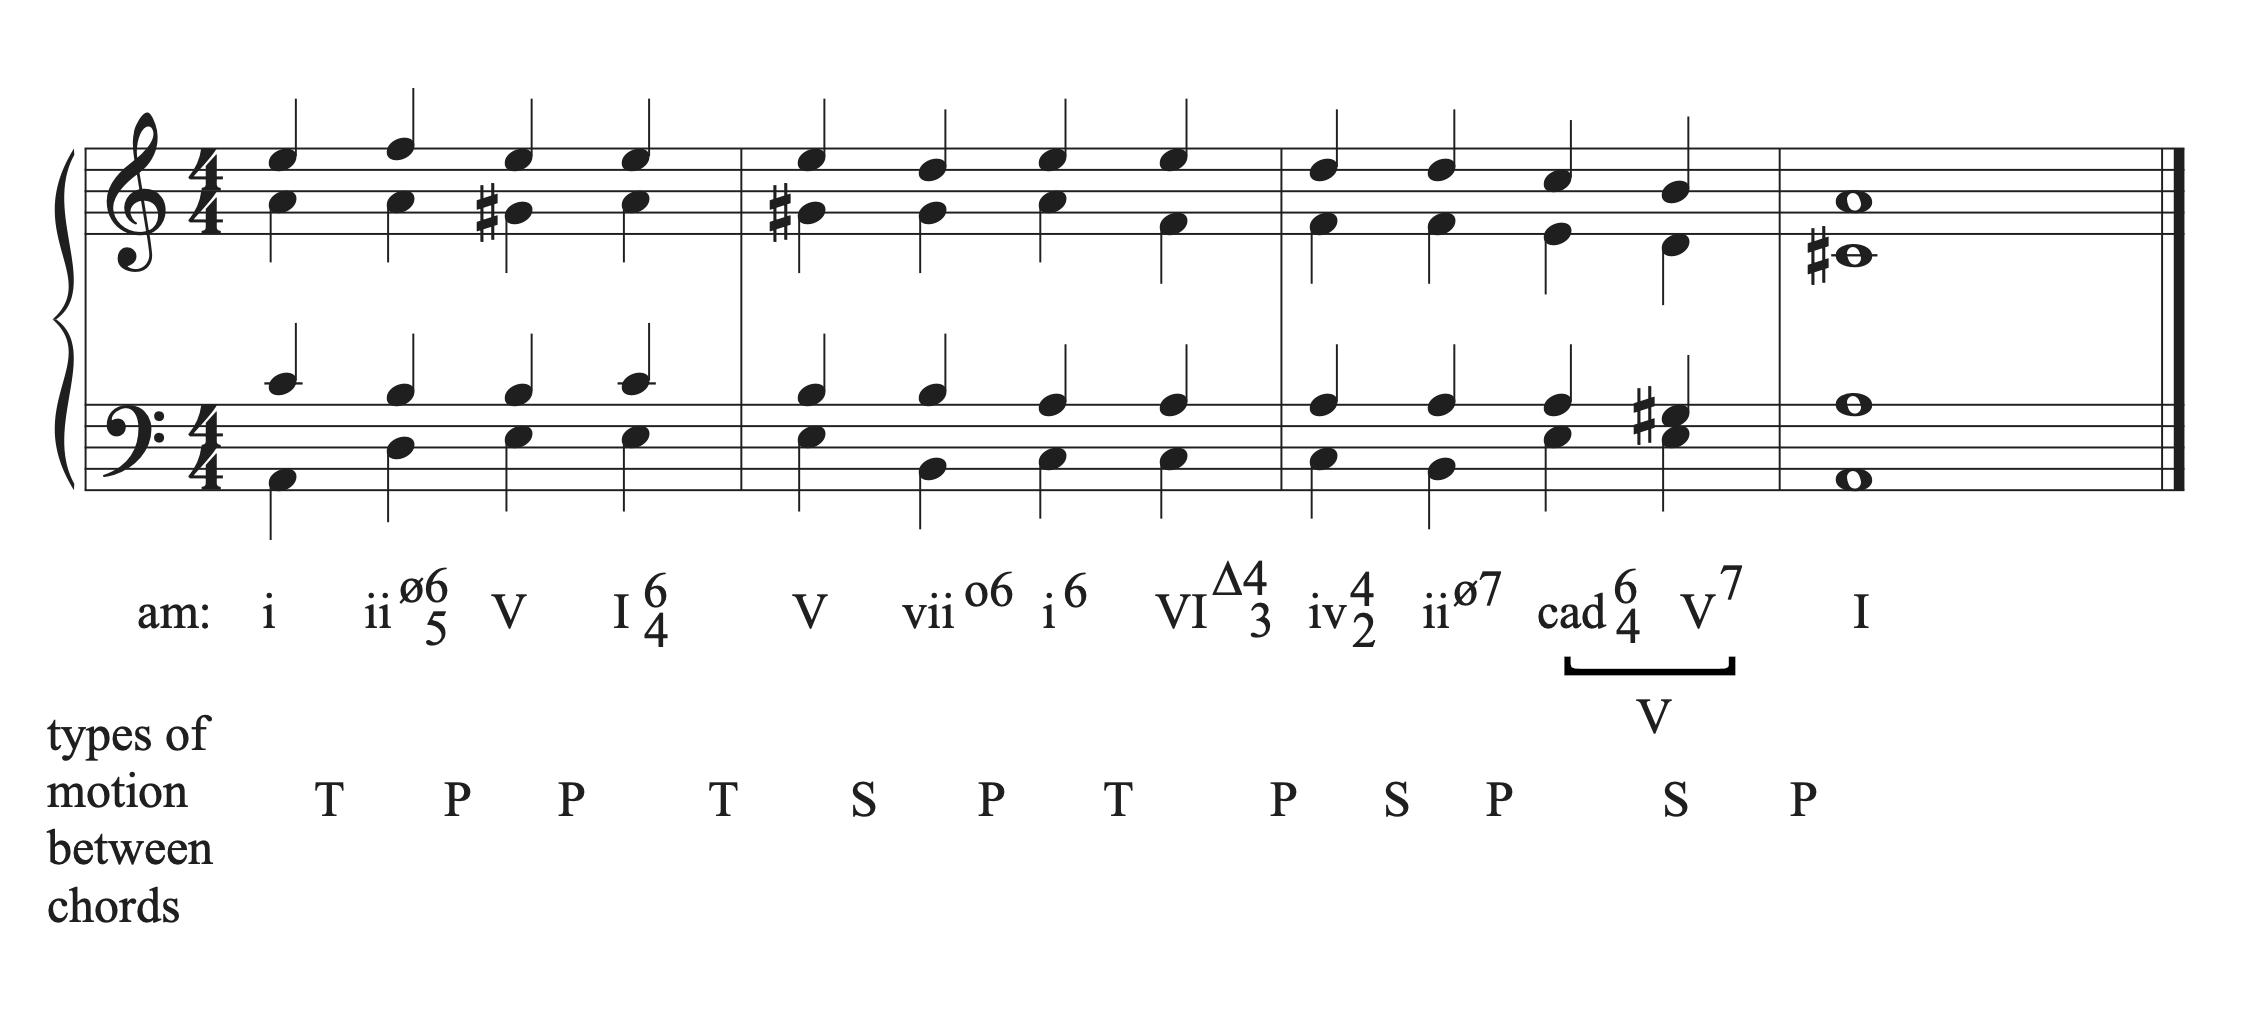 A musical example shows a I six-four chord functioning as tonic within the progression, and as a cadential six-four chord at the final cadence.